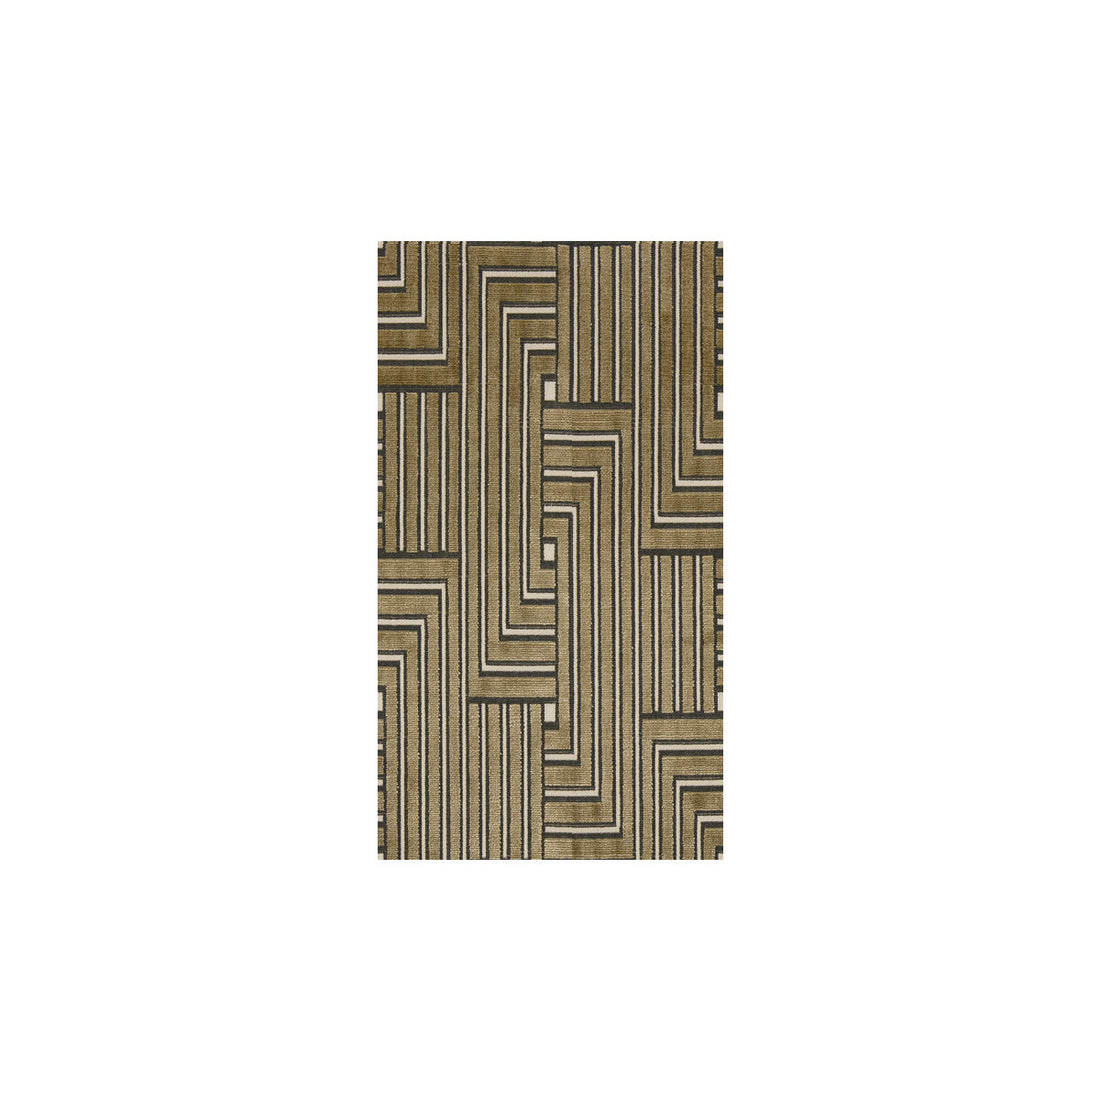 Louvered Maze fabric in linen color - pattern GWF-3041.816.0 - by Lee Jofa Modern in the Ventana Weaves collection